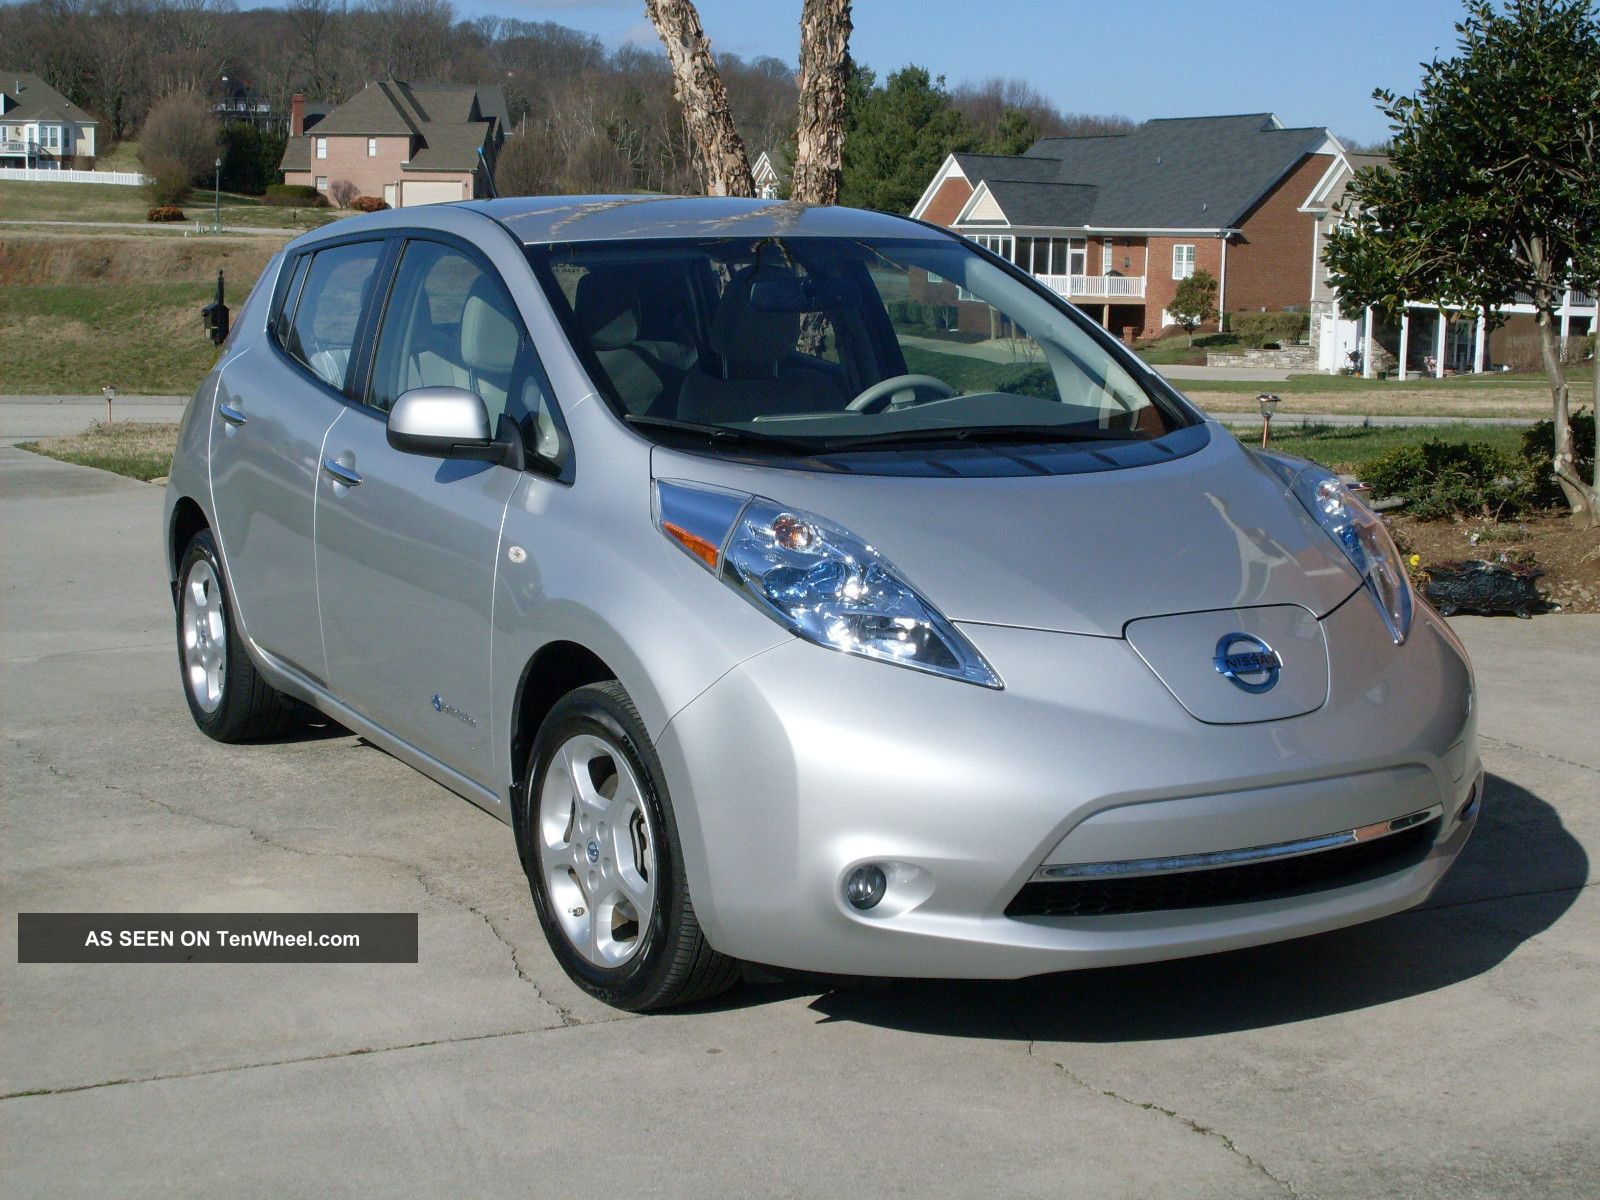 Nissan leaf in cold weather #9